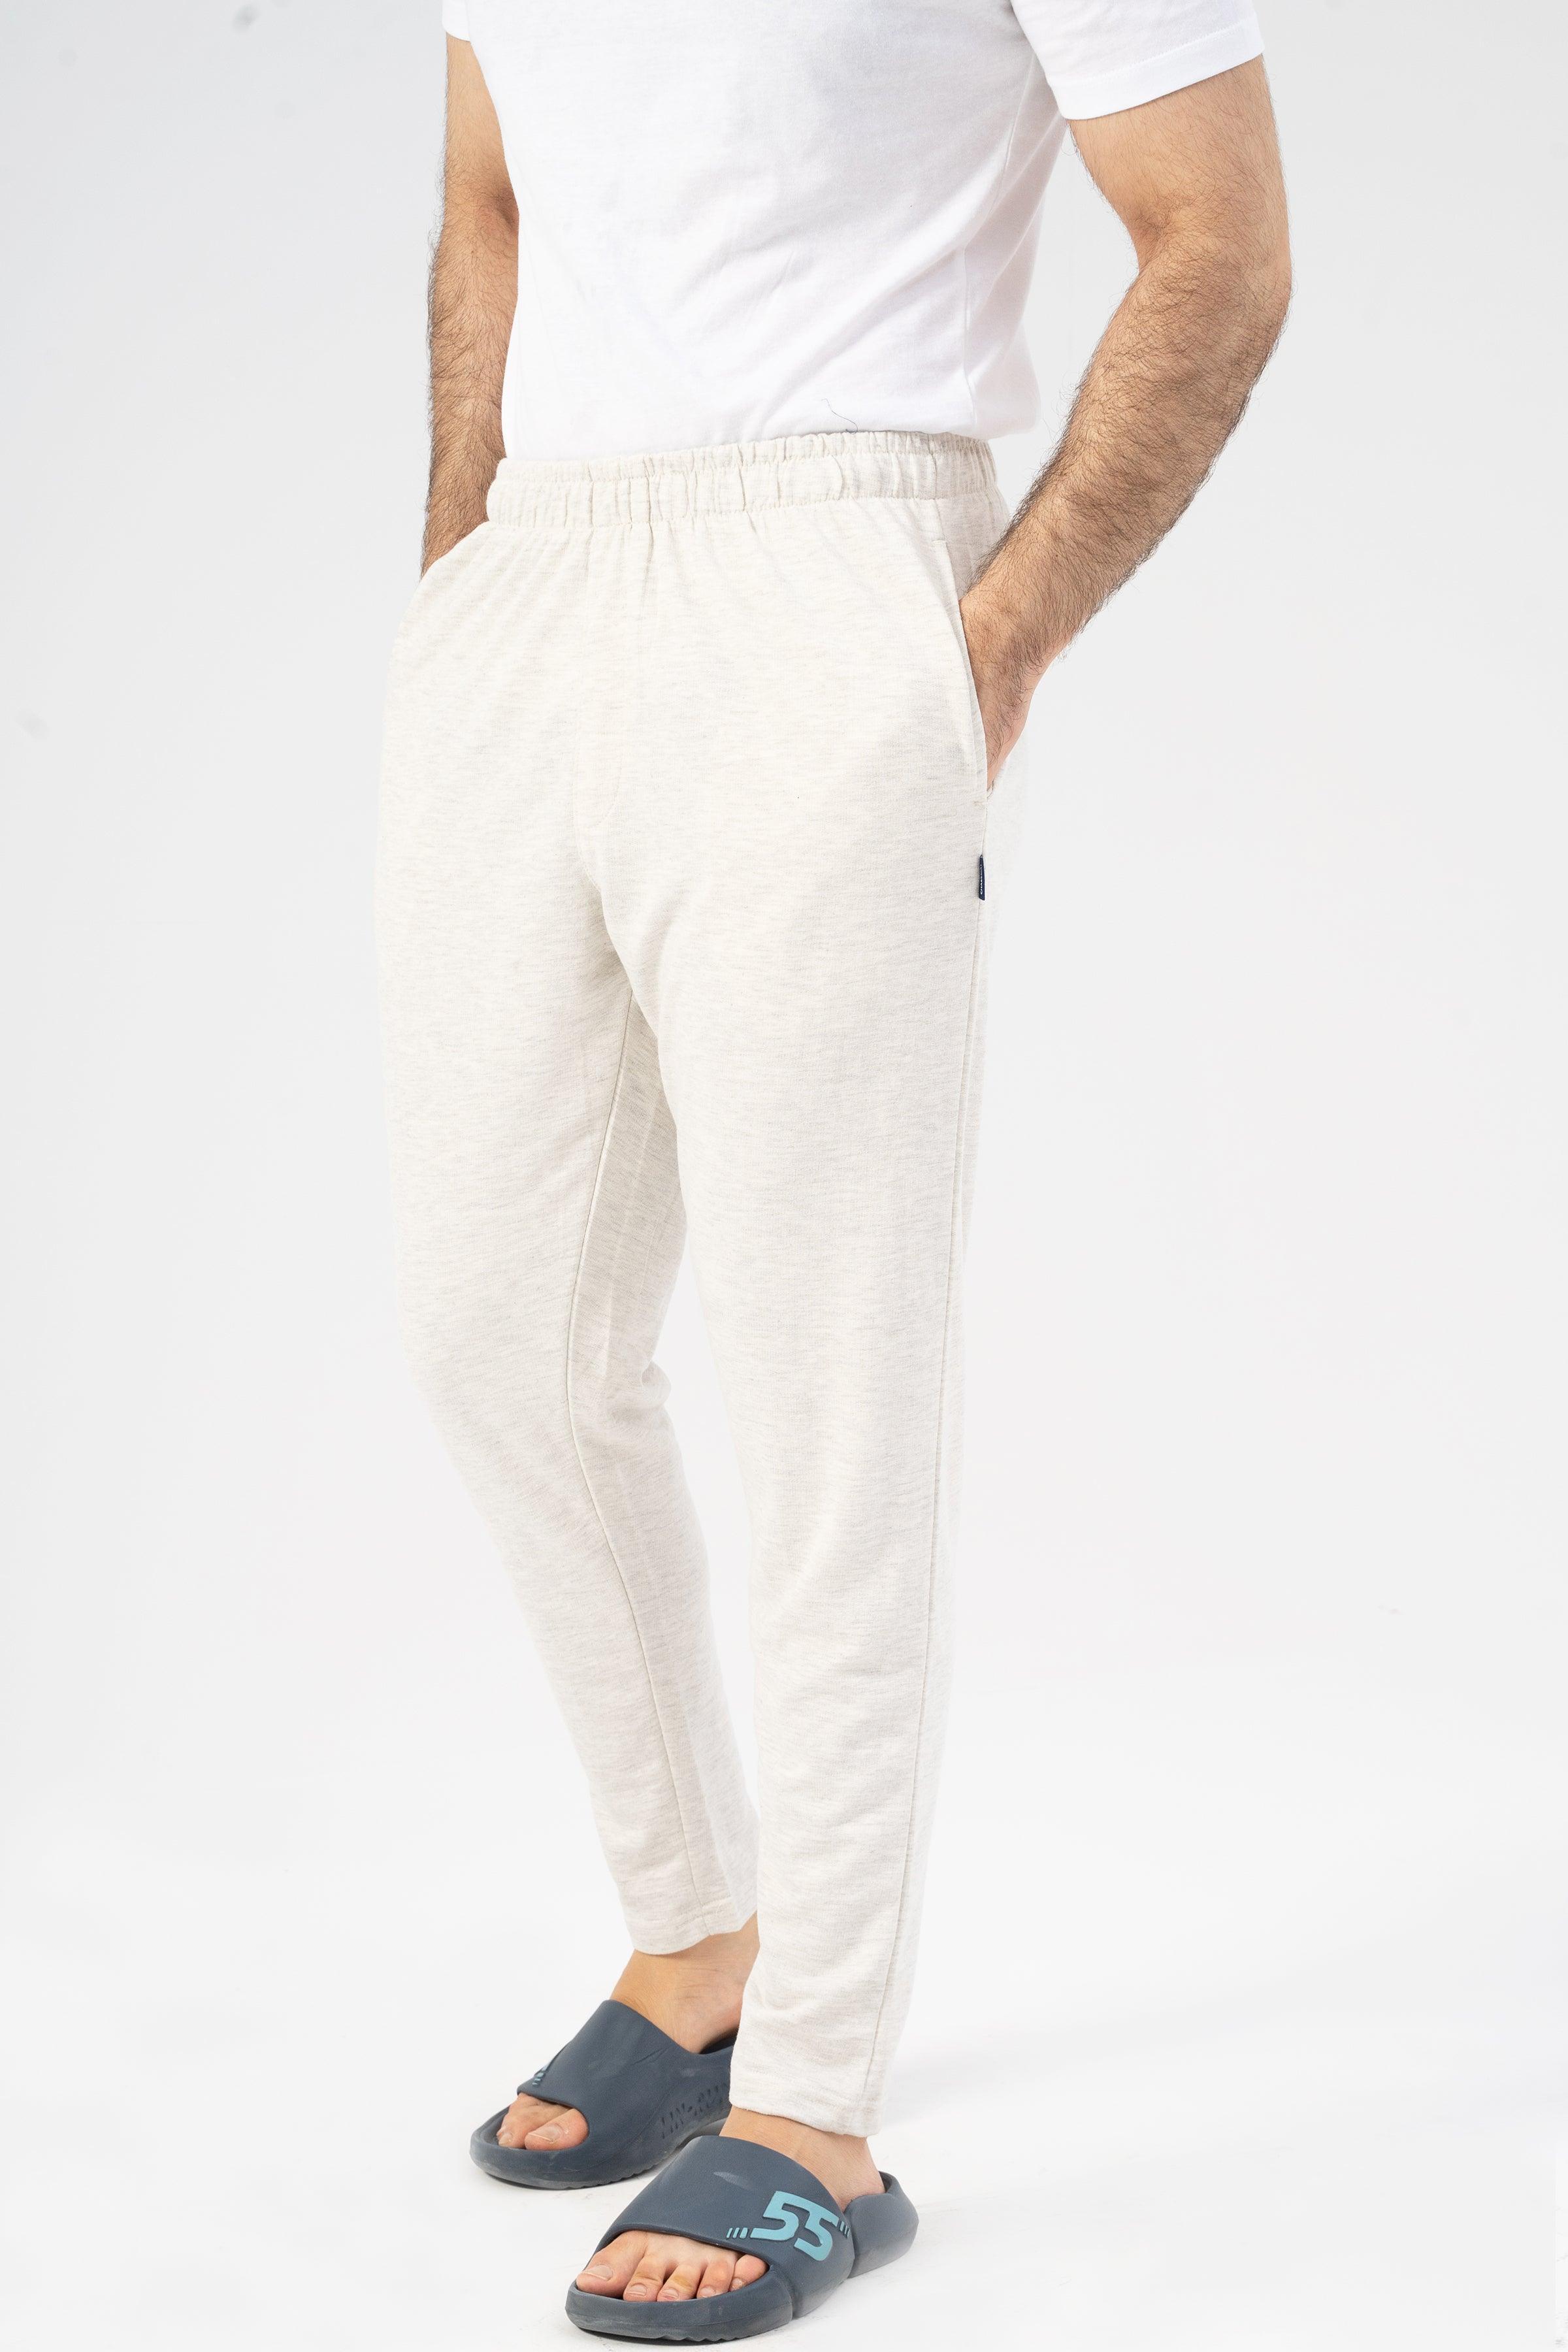 ULTIMATE COMFORT SLEEPWEAR PANT OATMEAL at Charcoal Clothing